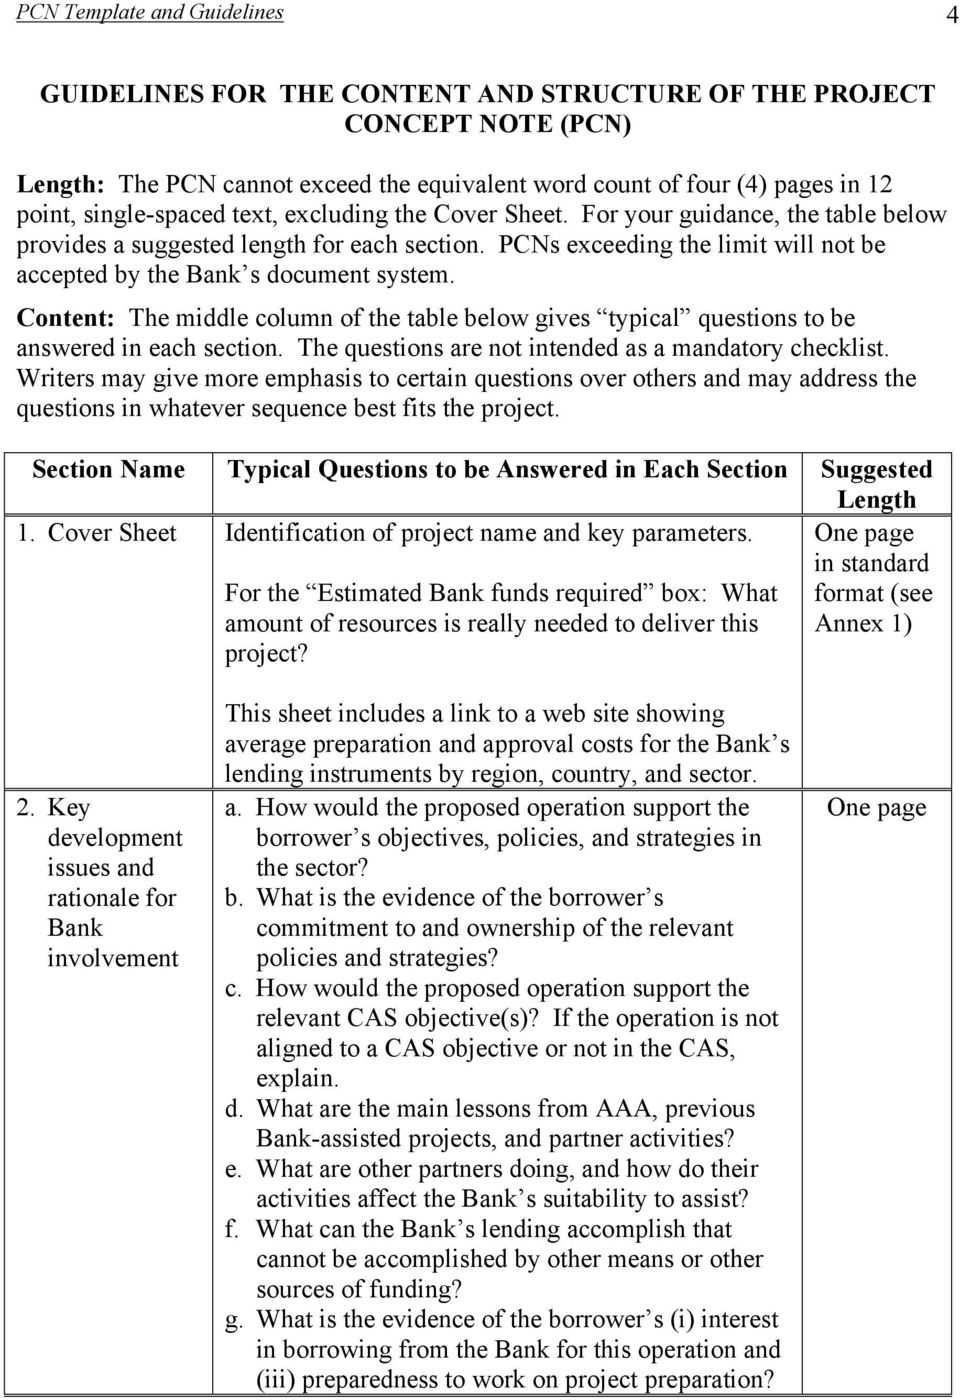 Template And Guidelines For The Project Concept Note (Pcn With Regard To Concept Note Template For Project